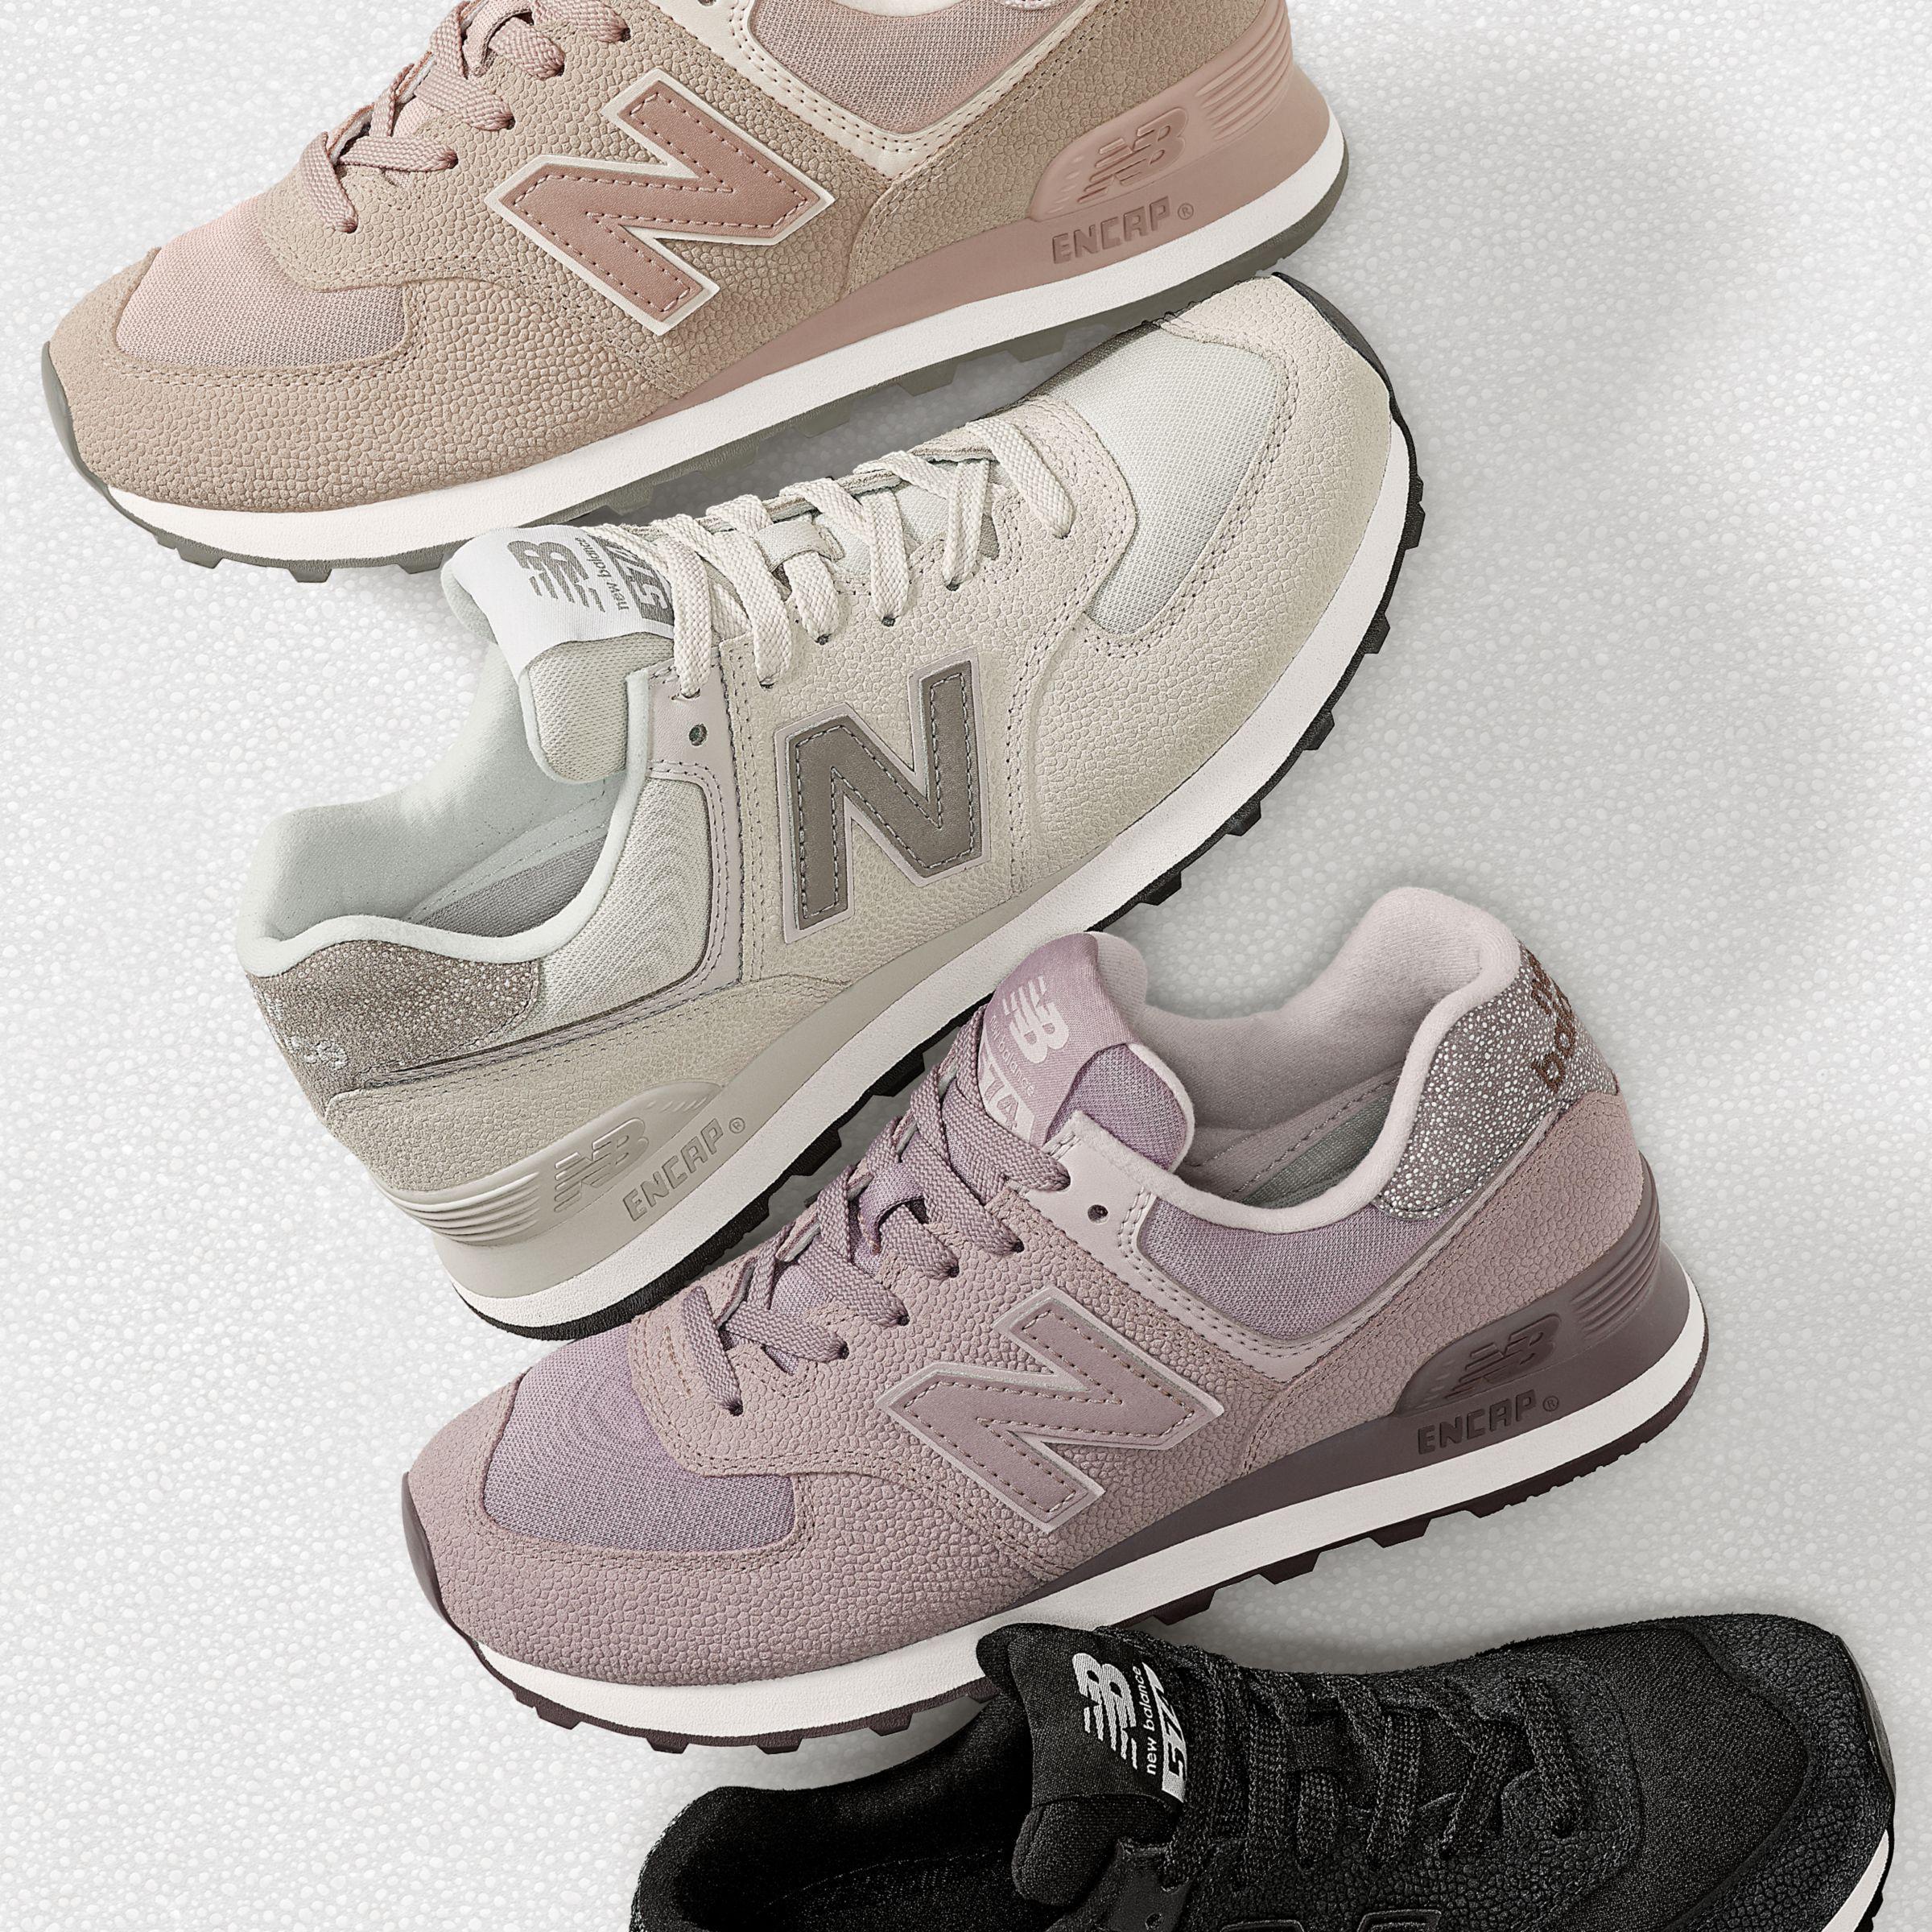 New Balance Suede 574 Pebbled Street 